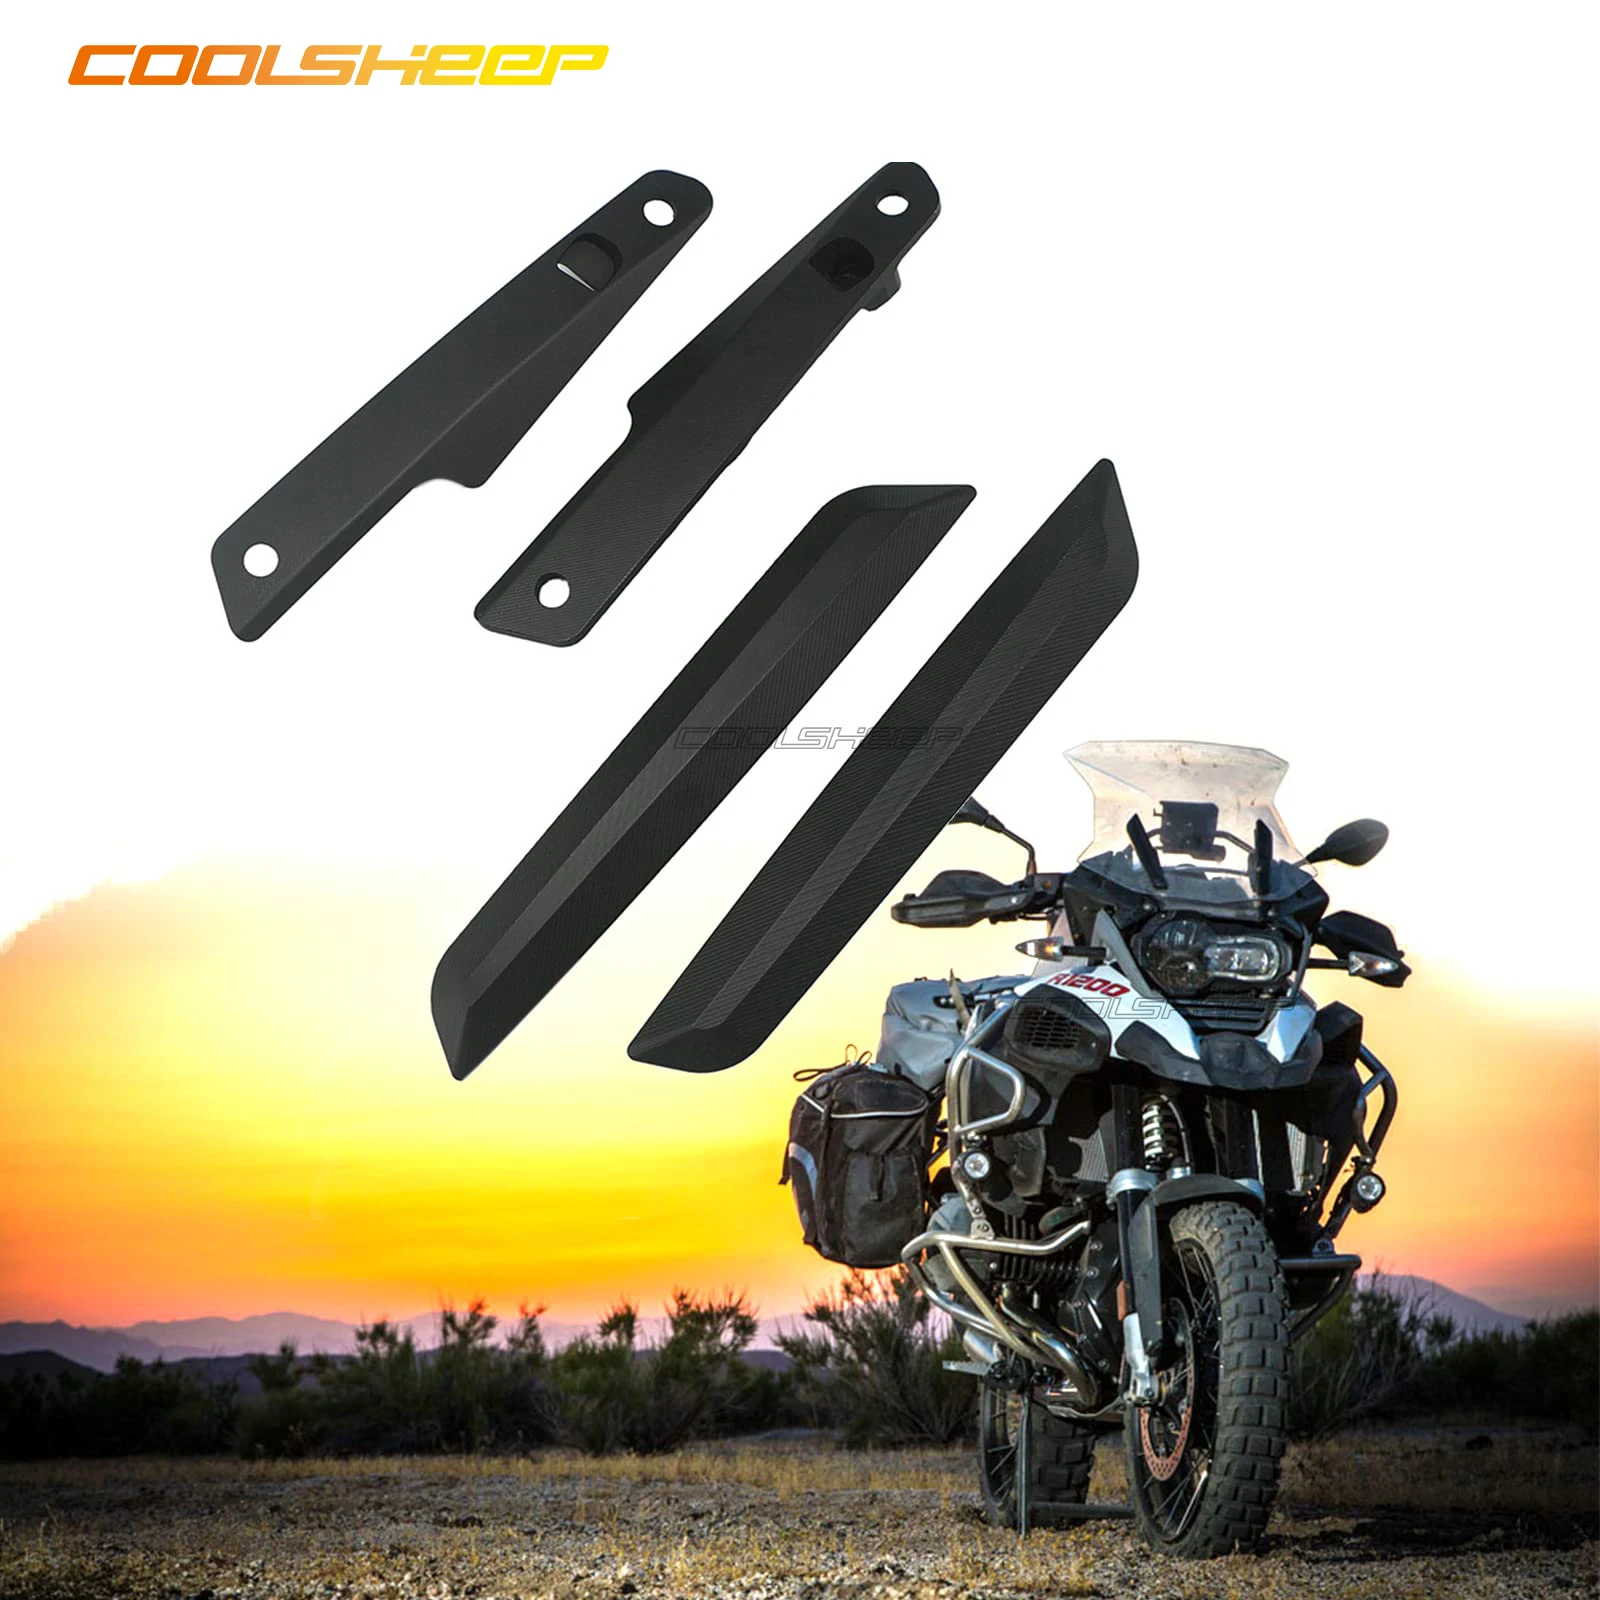 Motorcycle Windscreen Windshield Trim Inside Outer Bracket Holder Strip  Support Kit for BMW R1200GS R1200 GS R 1200 GS LC ADV 2013-2019 R1250GS  R1250